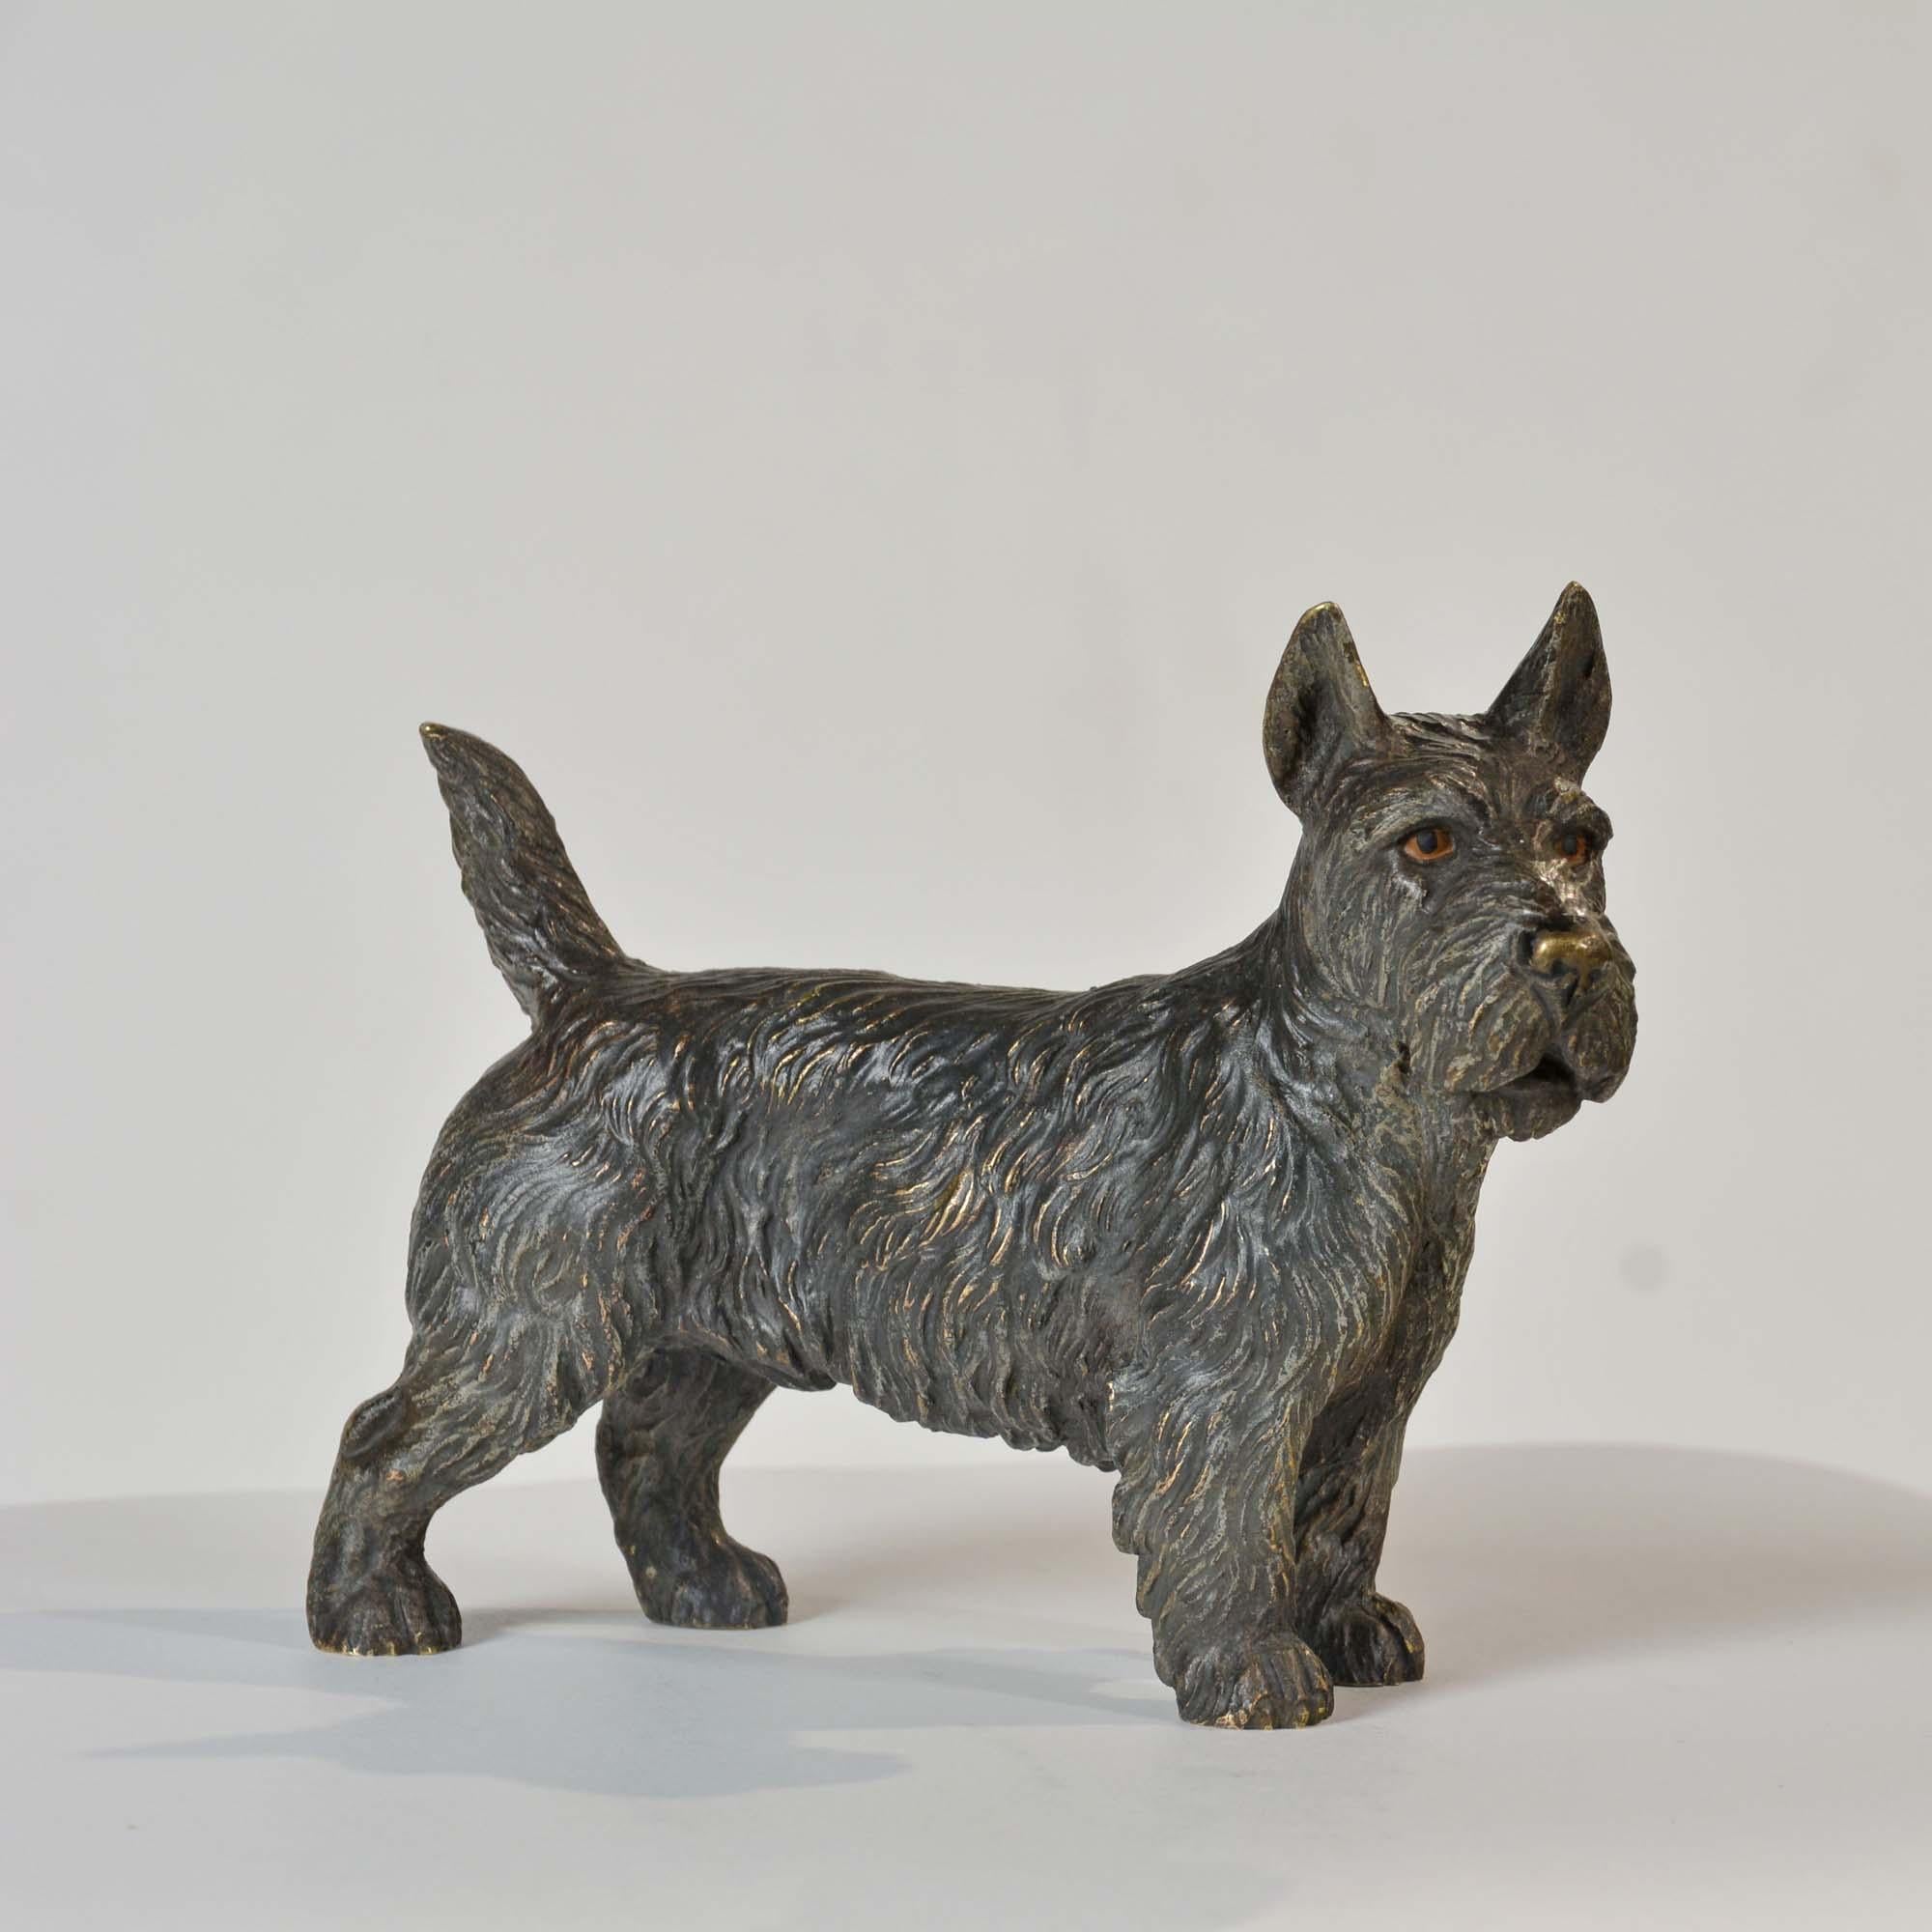 Austrian cold painted bronze of a Scottish Terrier, or 'Scottie Dog' For Sale 3